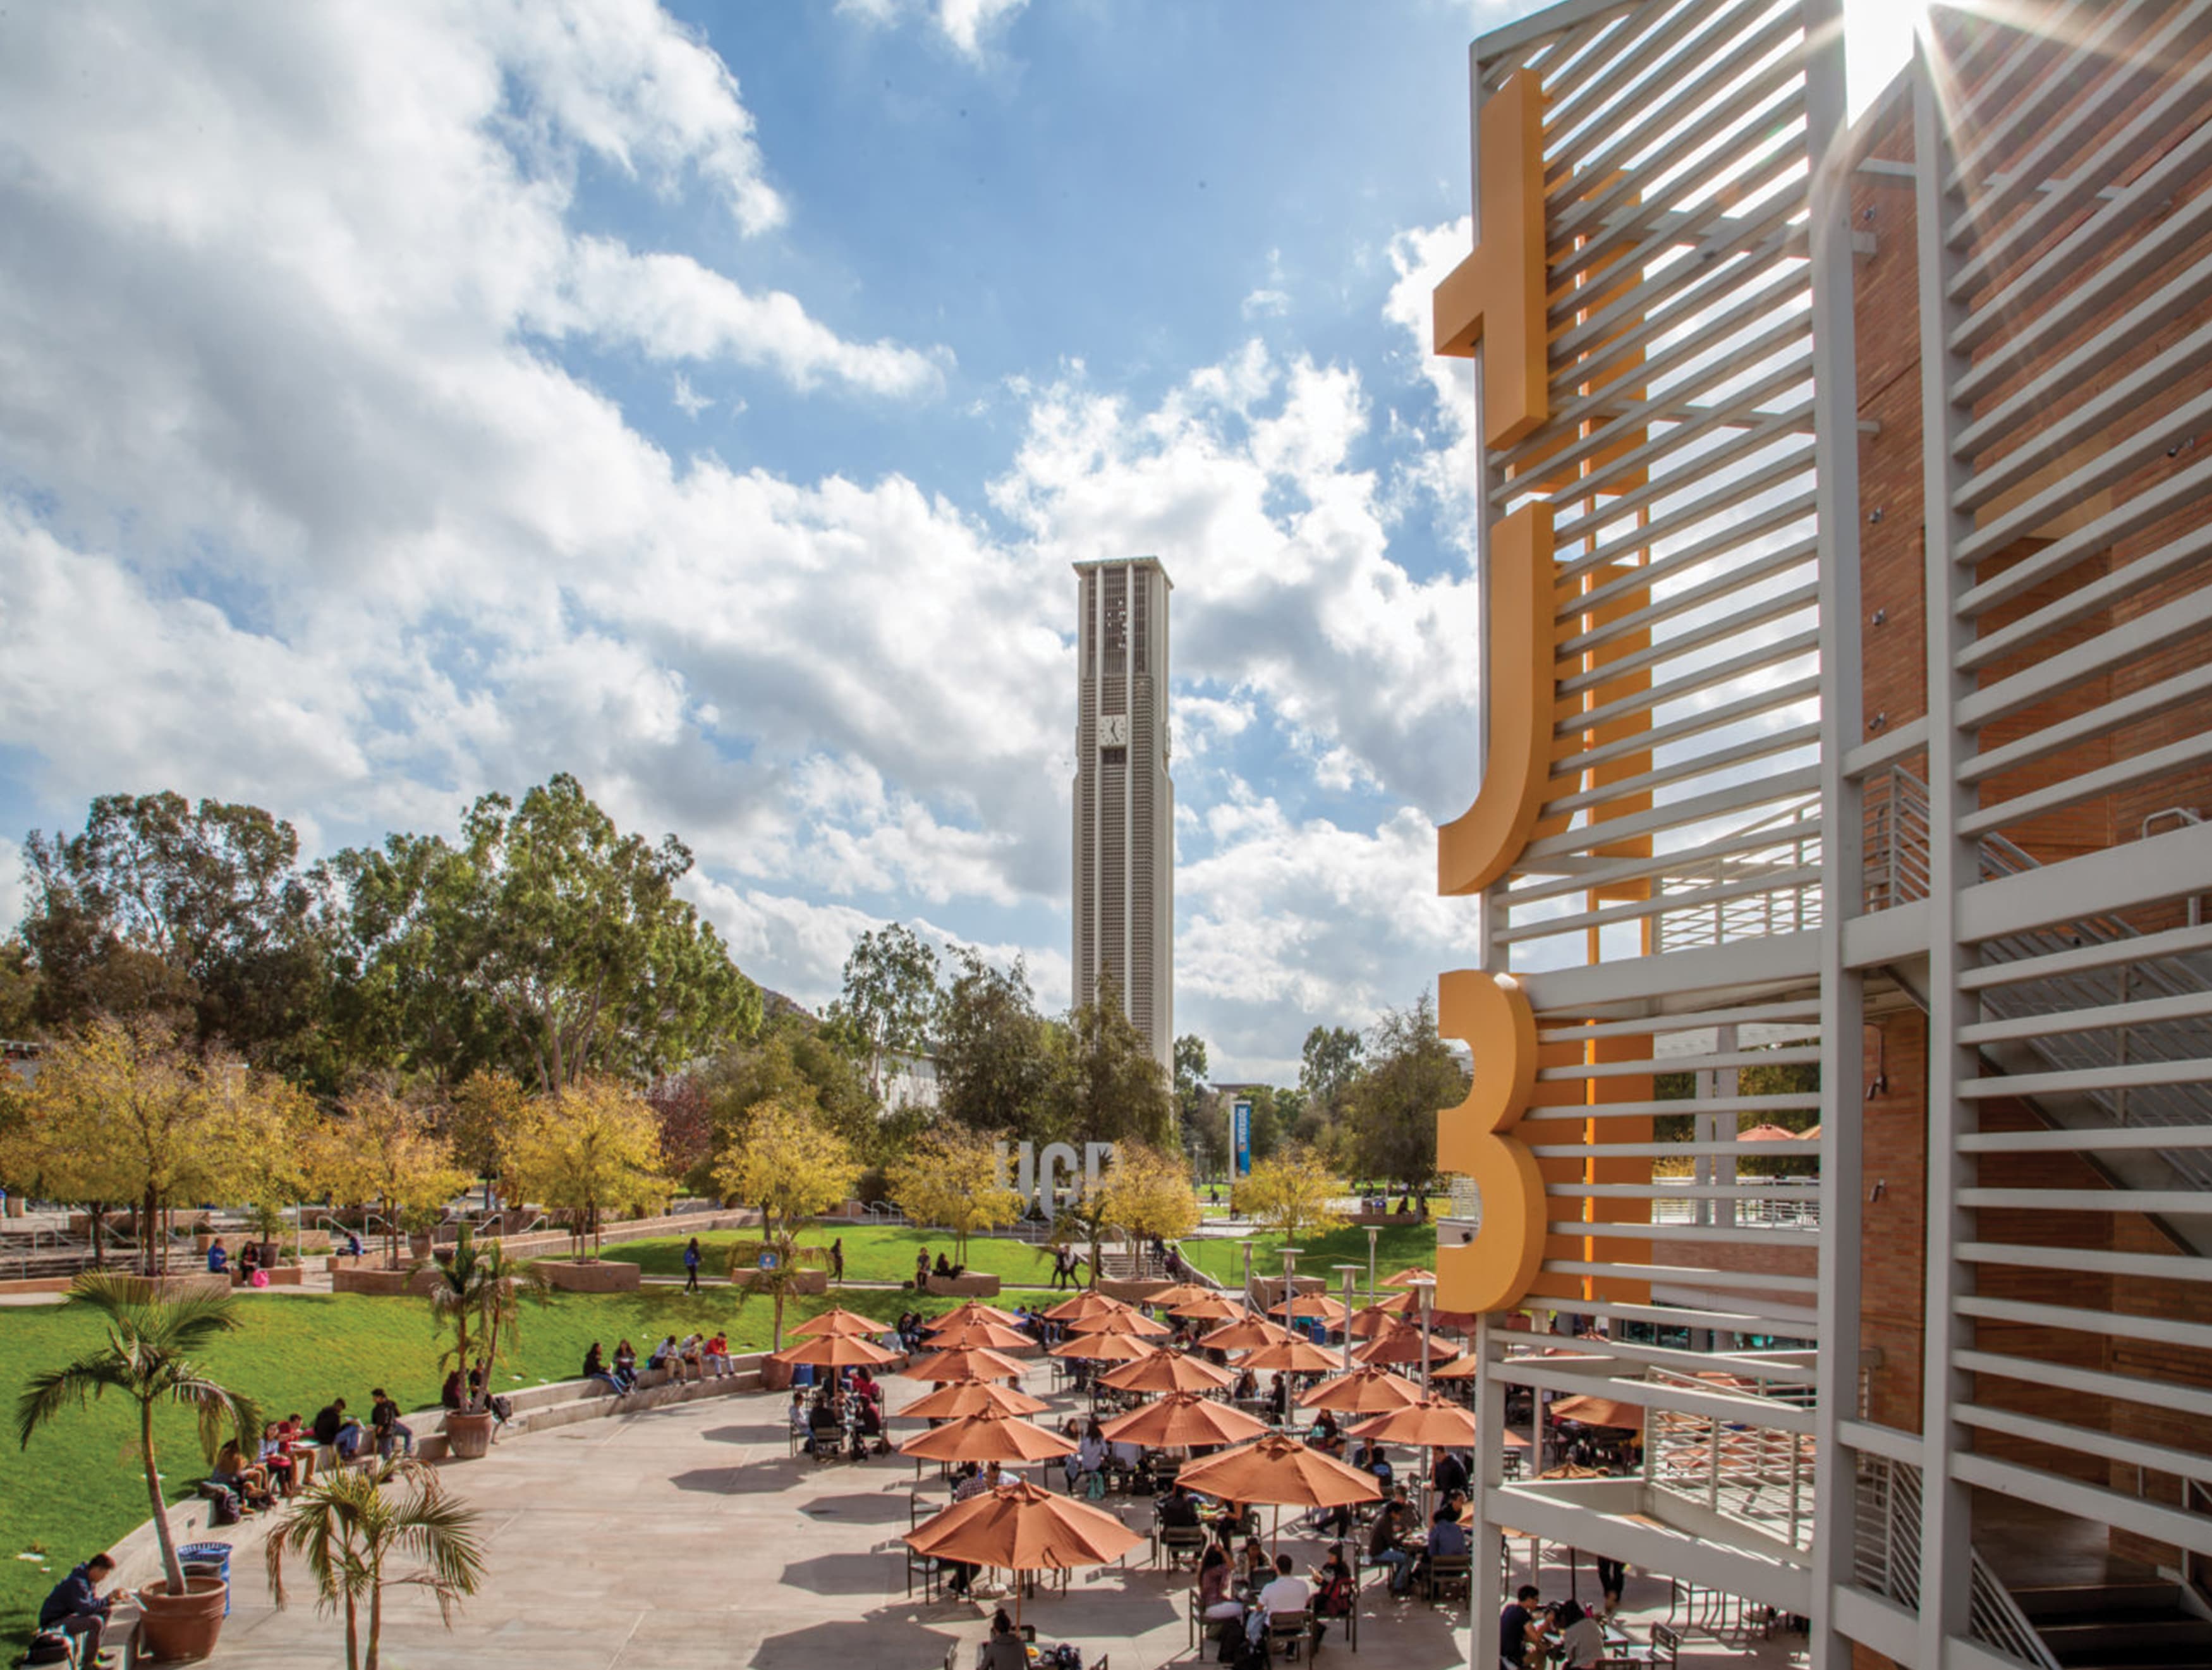 A plaza featuring signage and open-air seating on the campus of UCR.